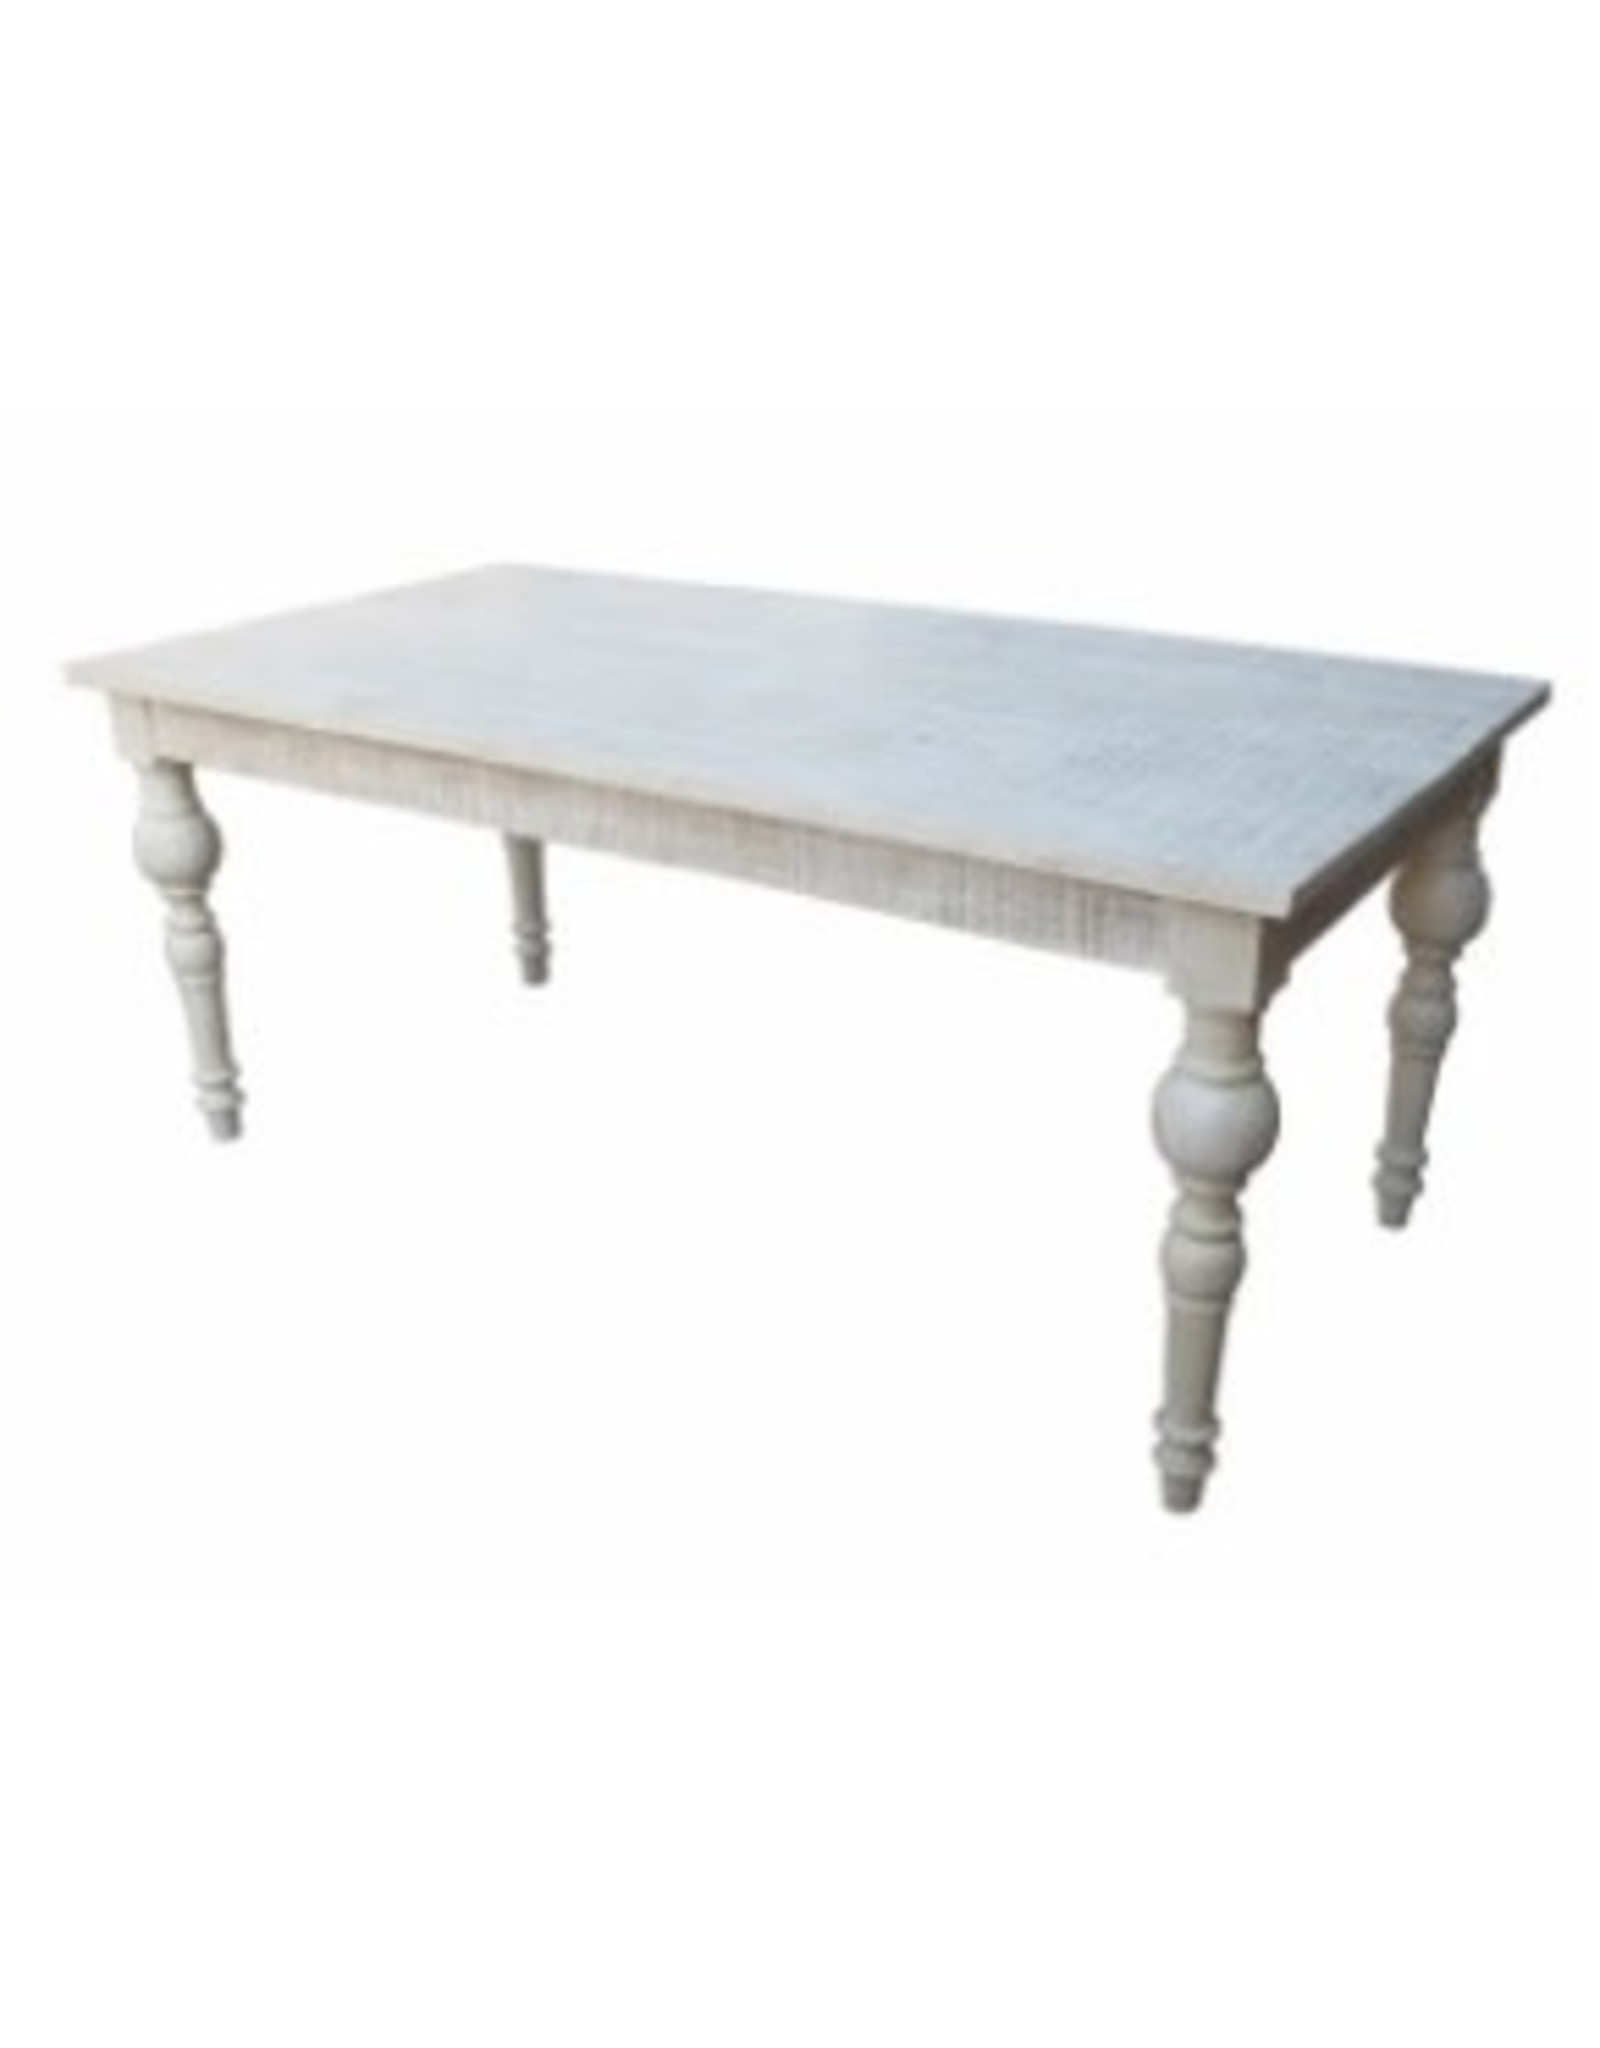 80003 Rectangle Table  71 x 356.5 x 30